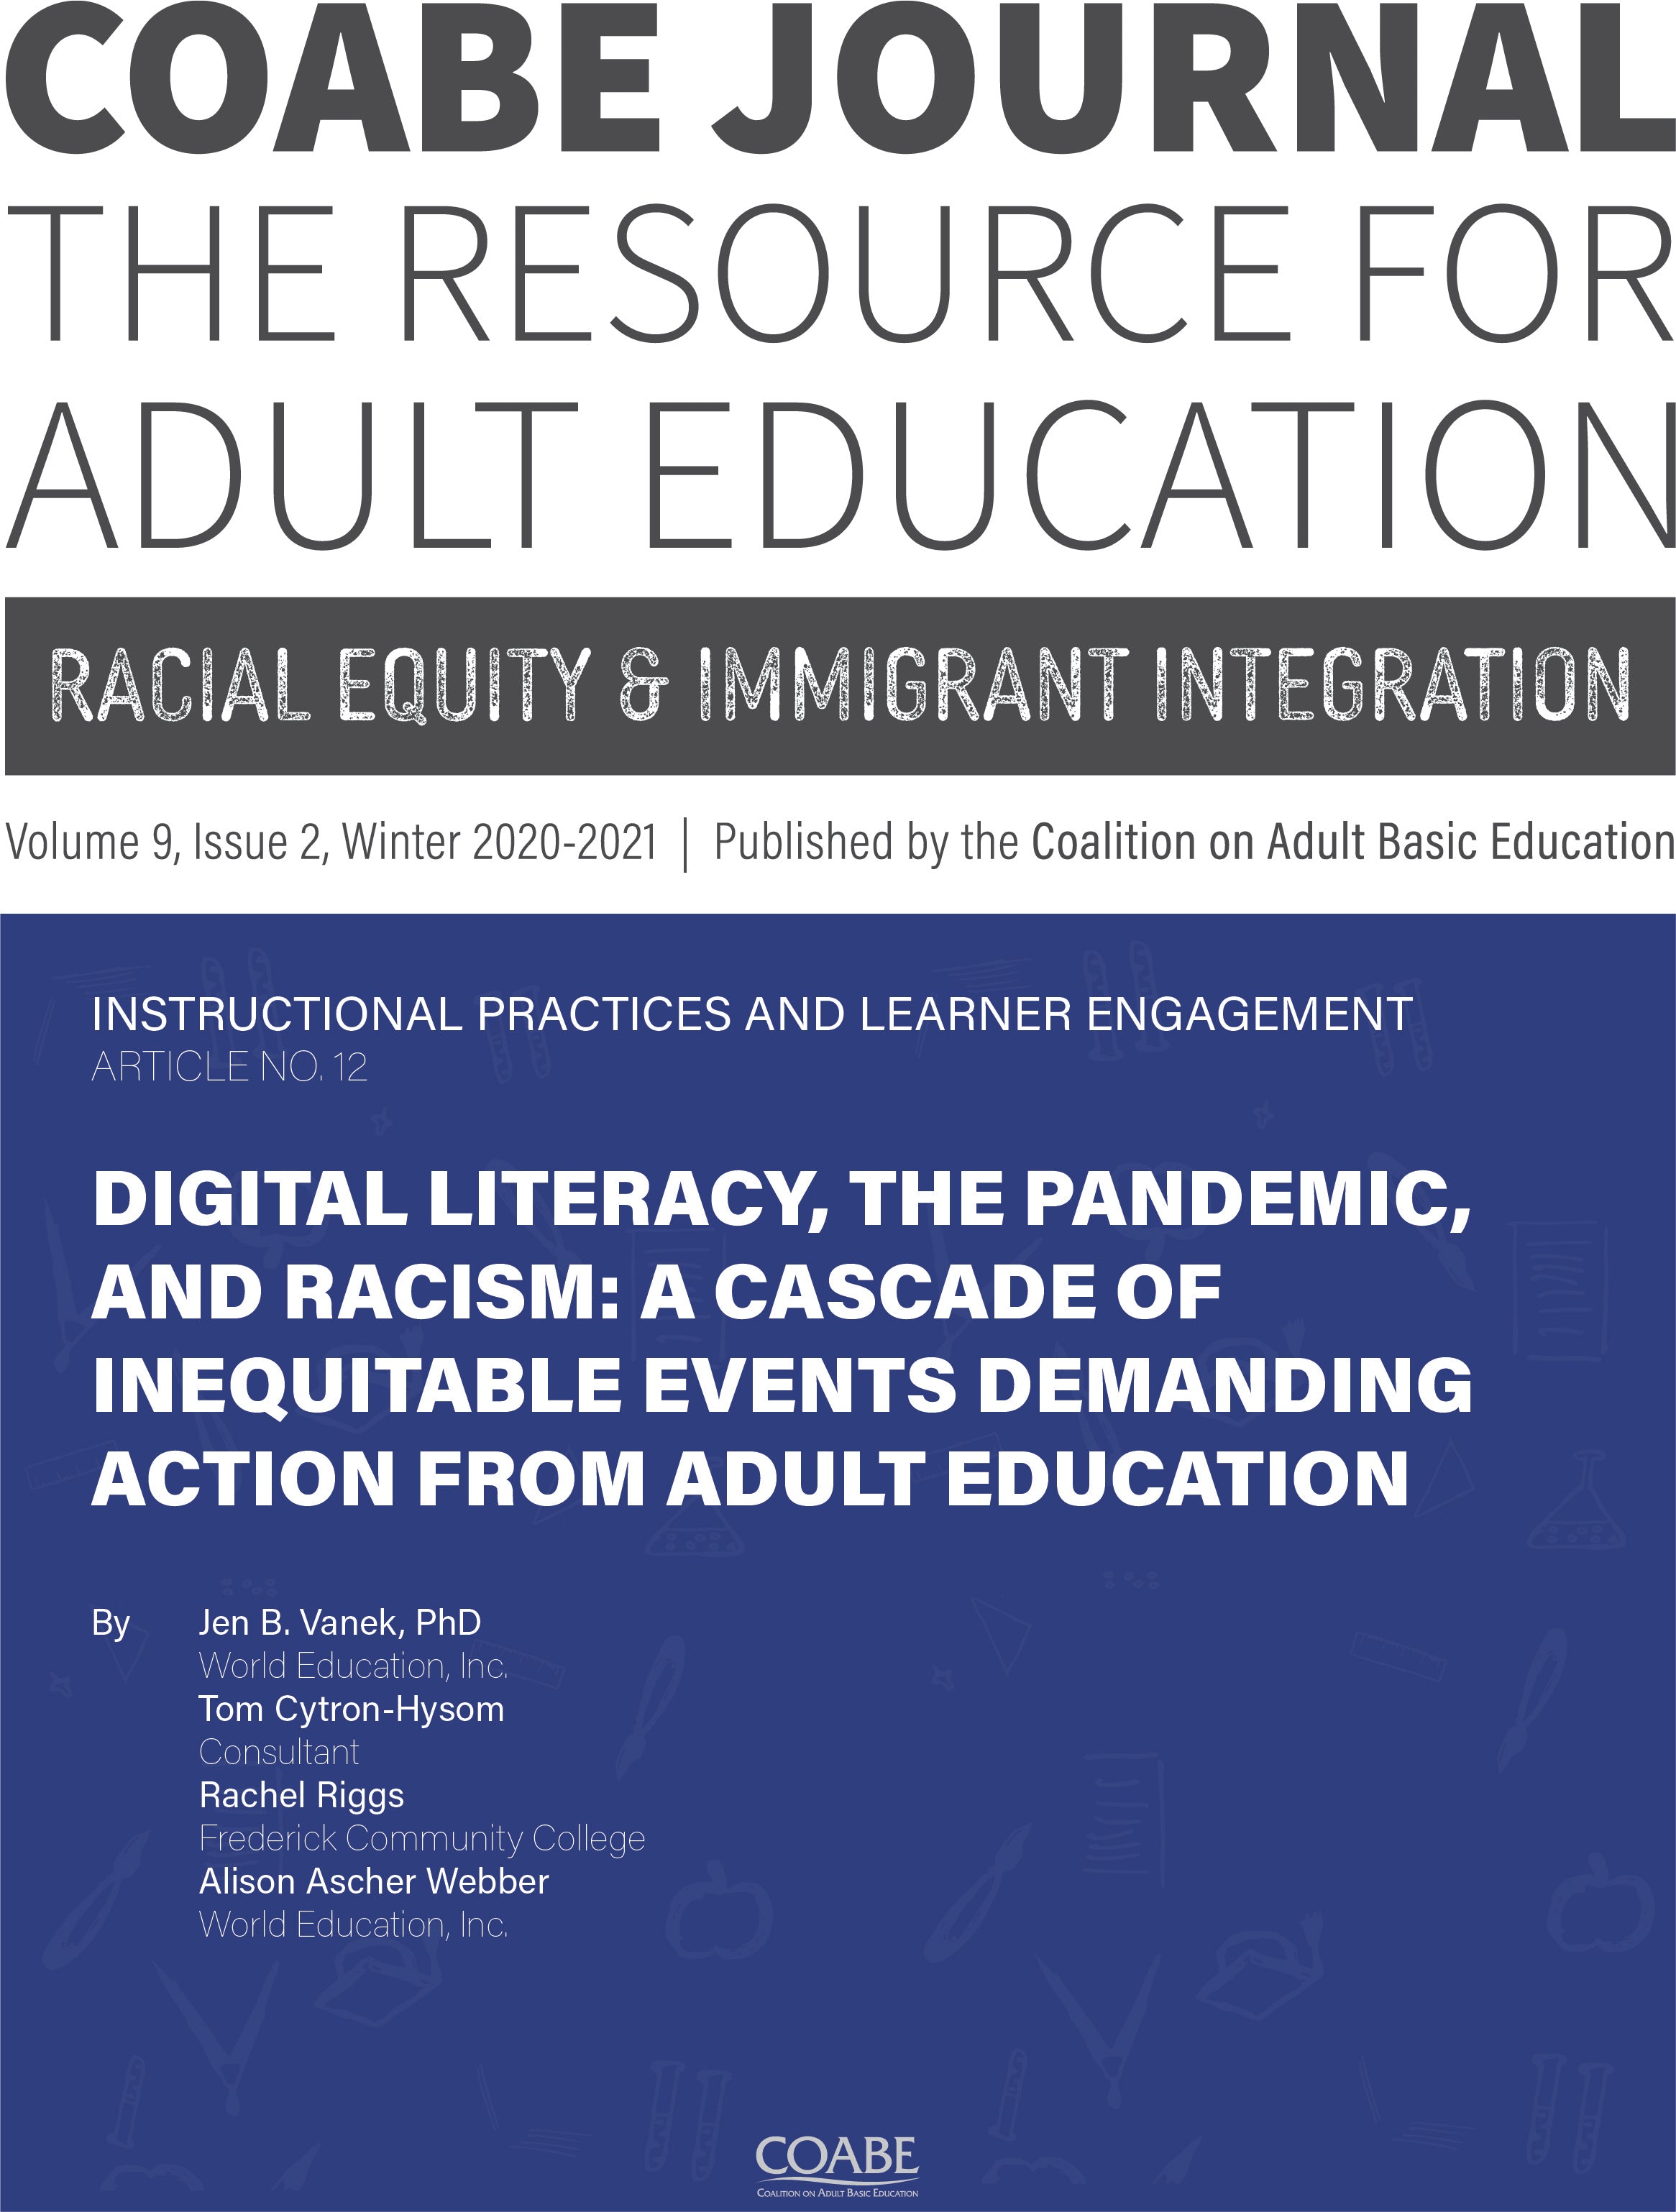 Article 12 / Digital Literacy, the Pandemic, and Racism: A Cascade of Inequitable Events Demanding Action from Adult Education